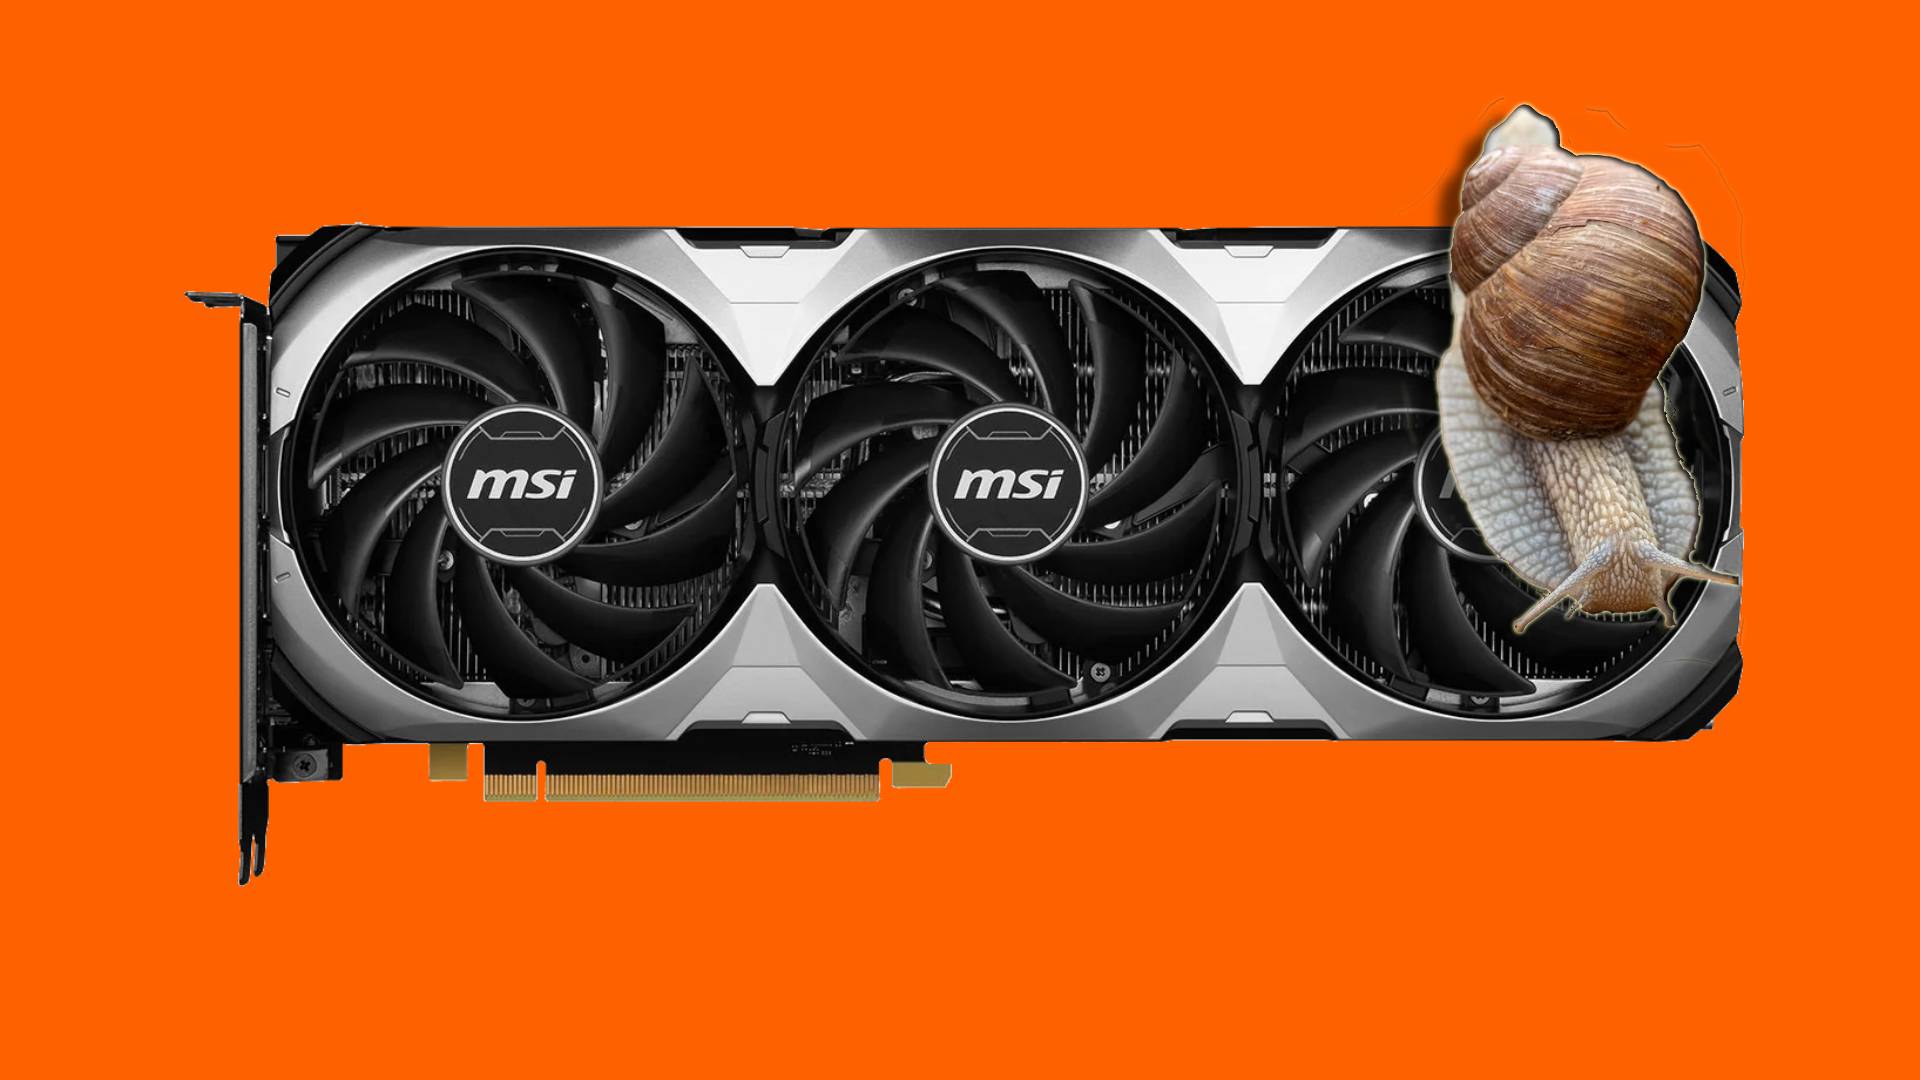 First RTX 4060 Ti 16GB Benchmarks From MSI Show Worse Performance Than 8GB  Variant